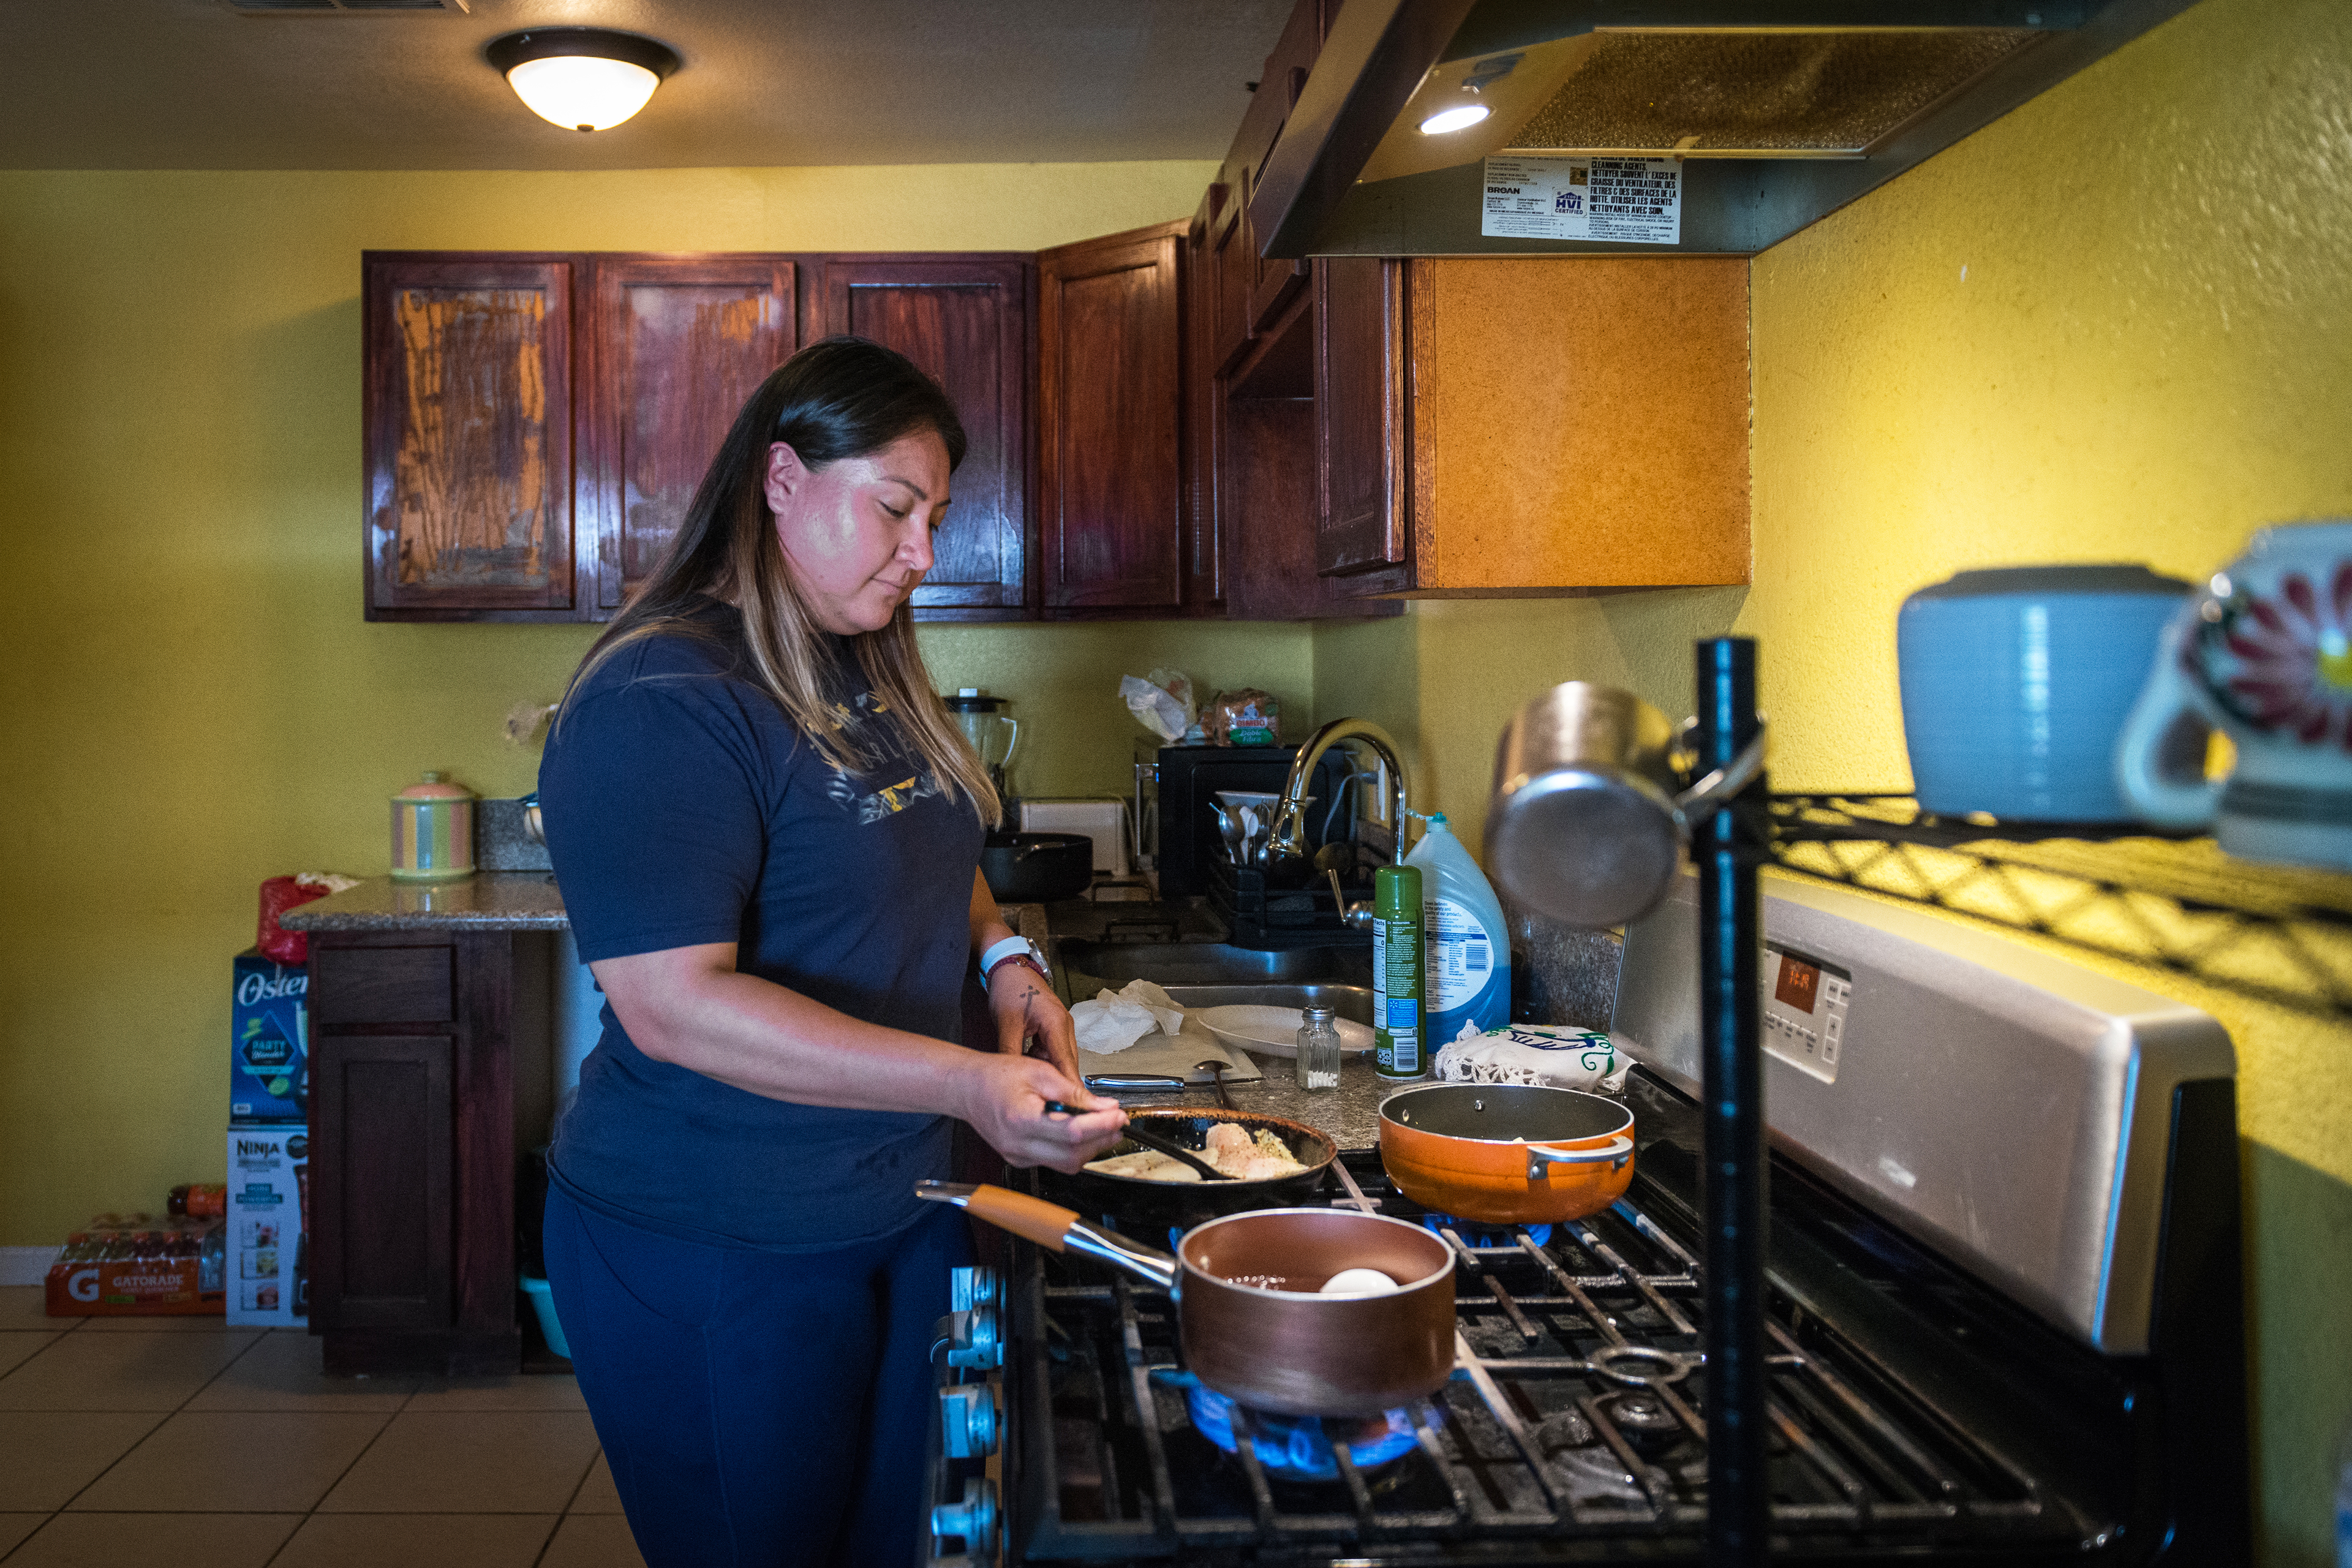 A photo shows Maria Cruz cooking on a stovetop.